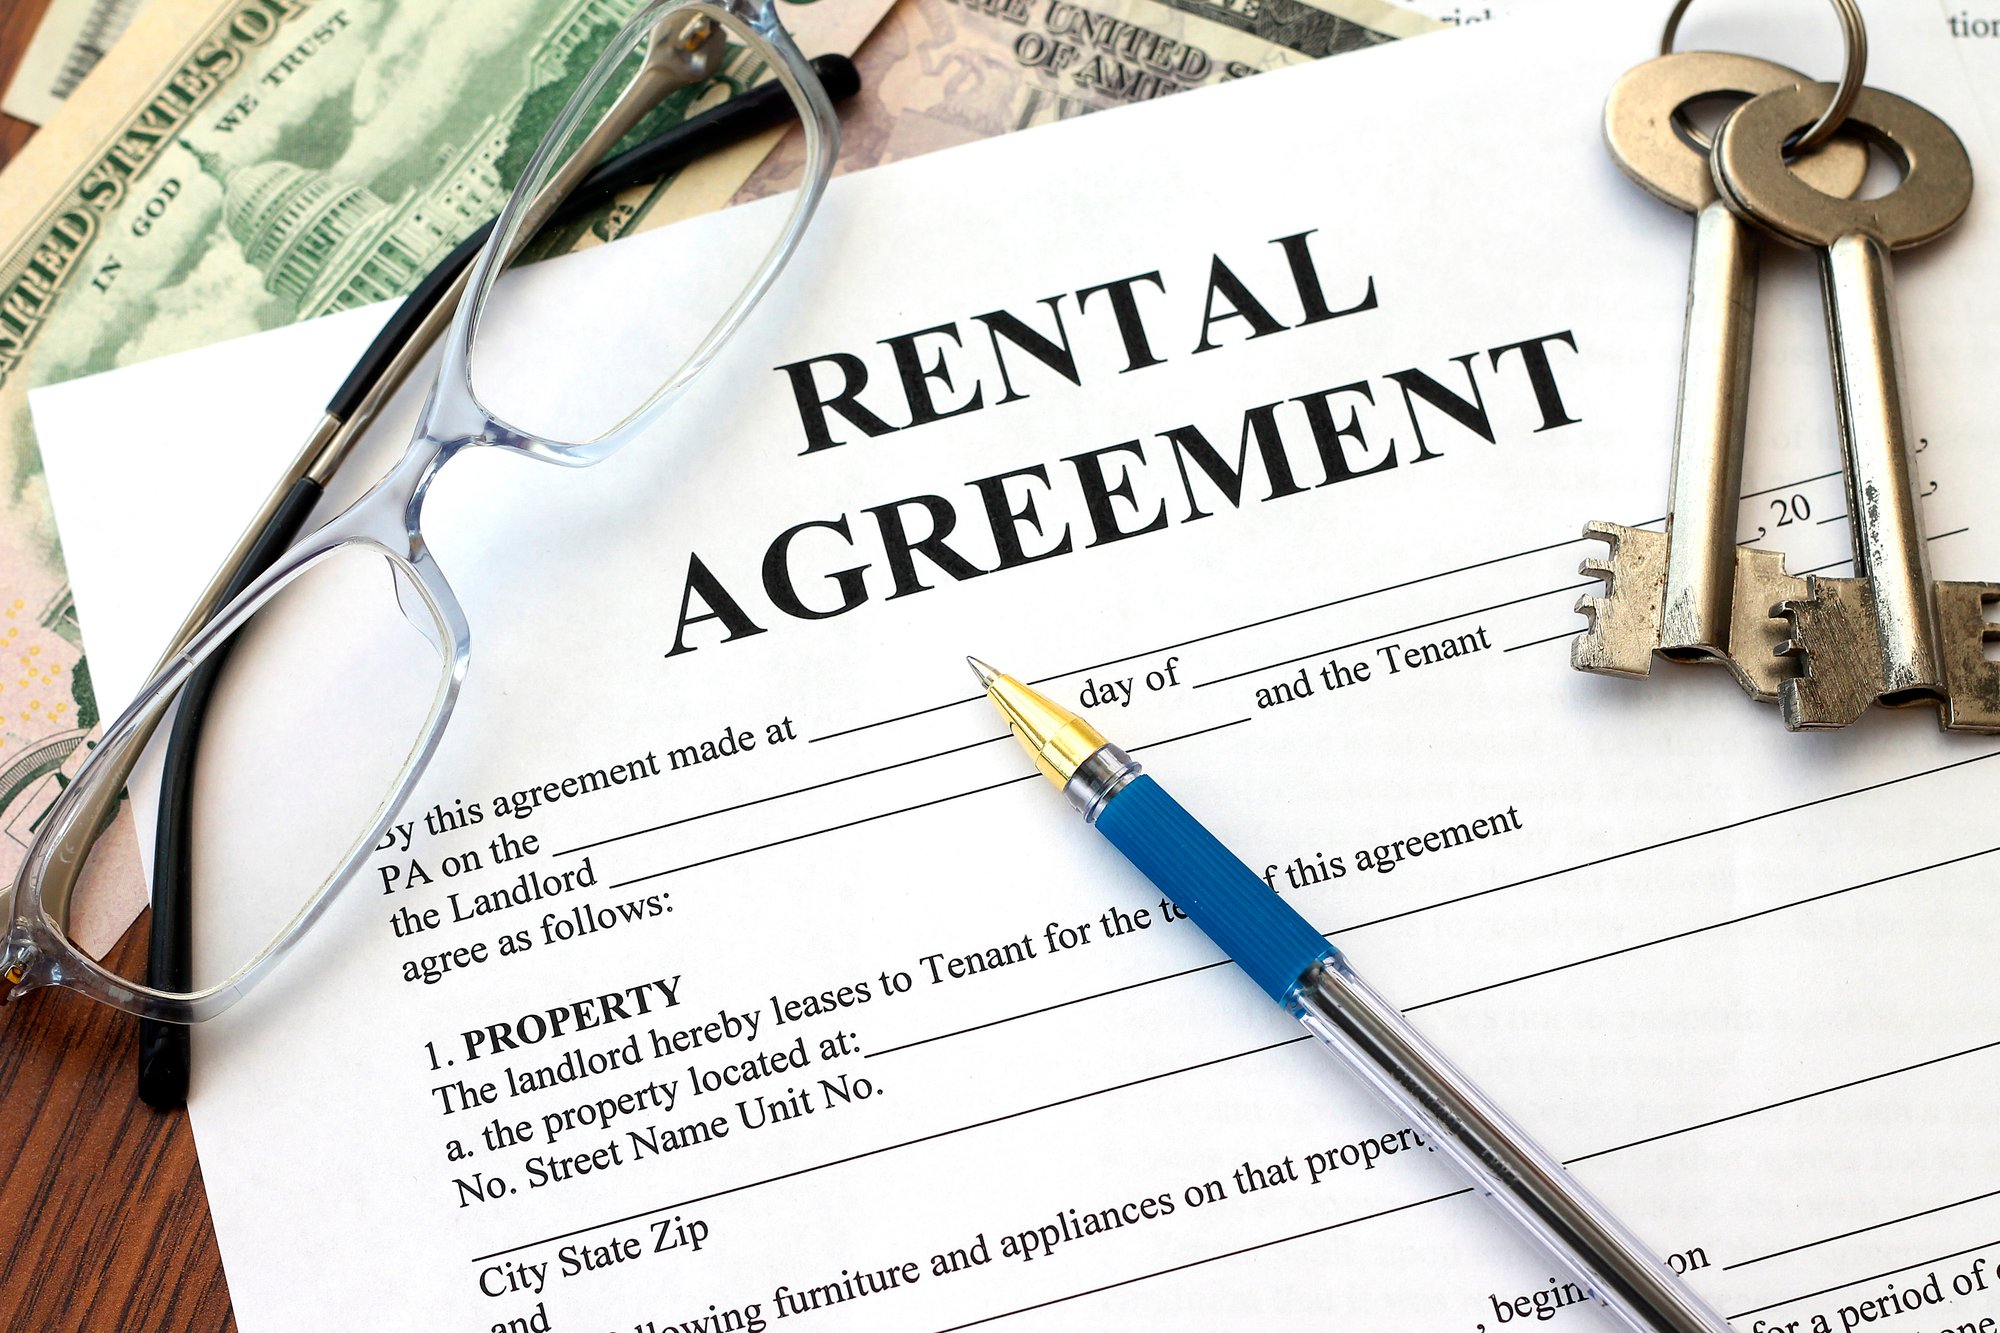 Lease document rental agreement